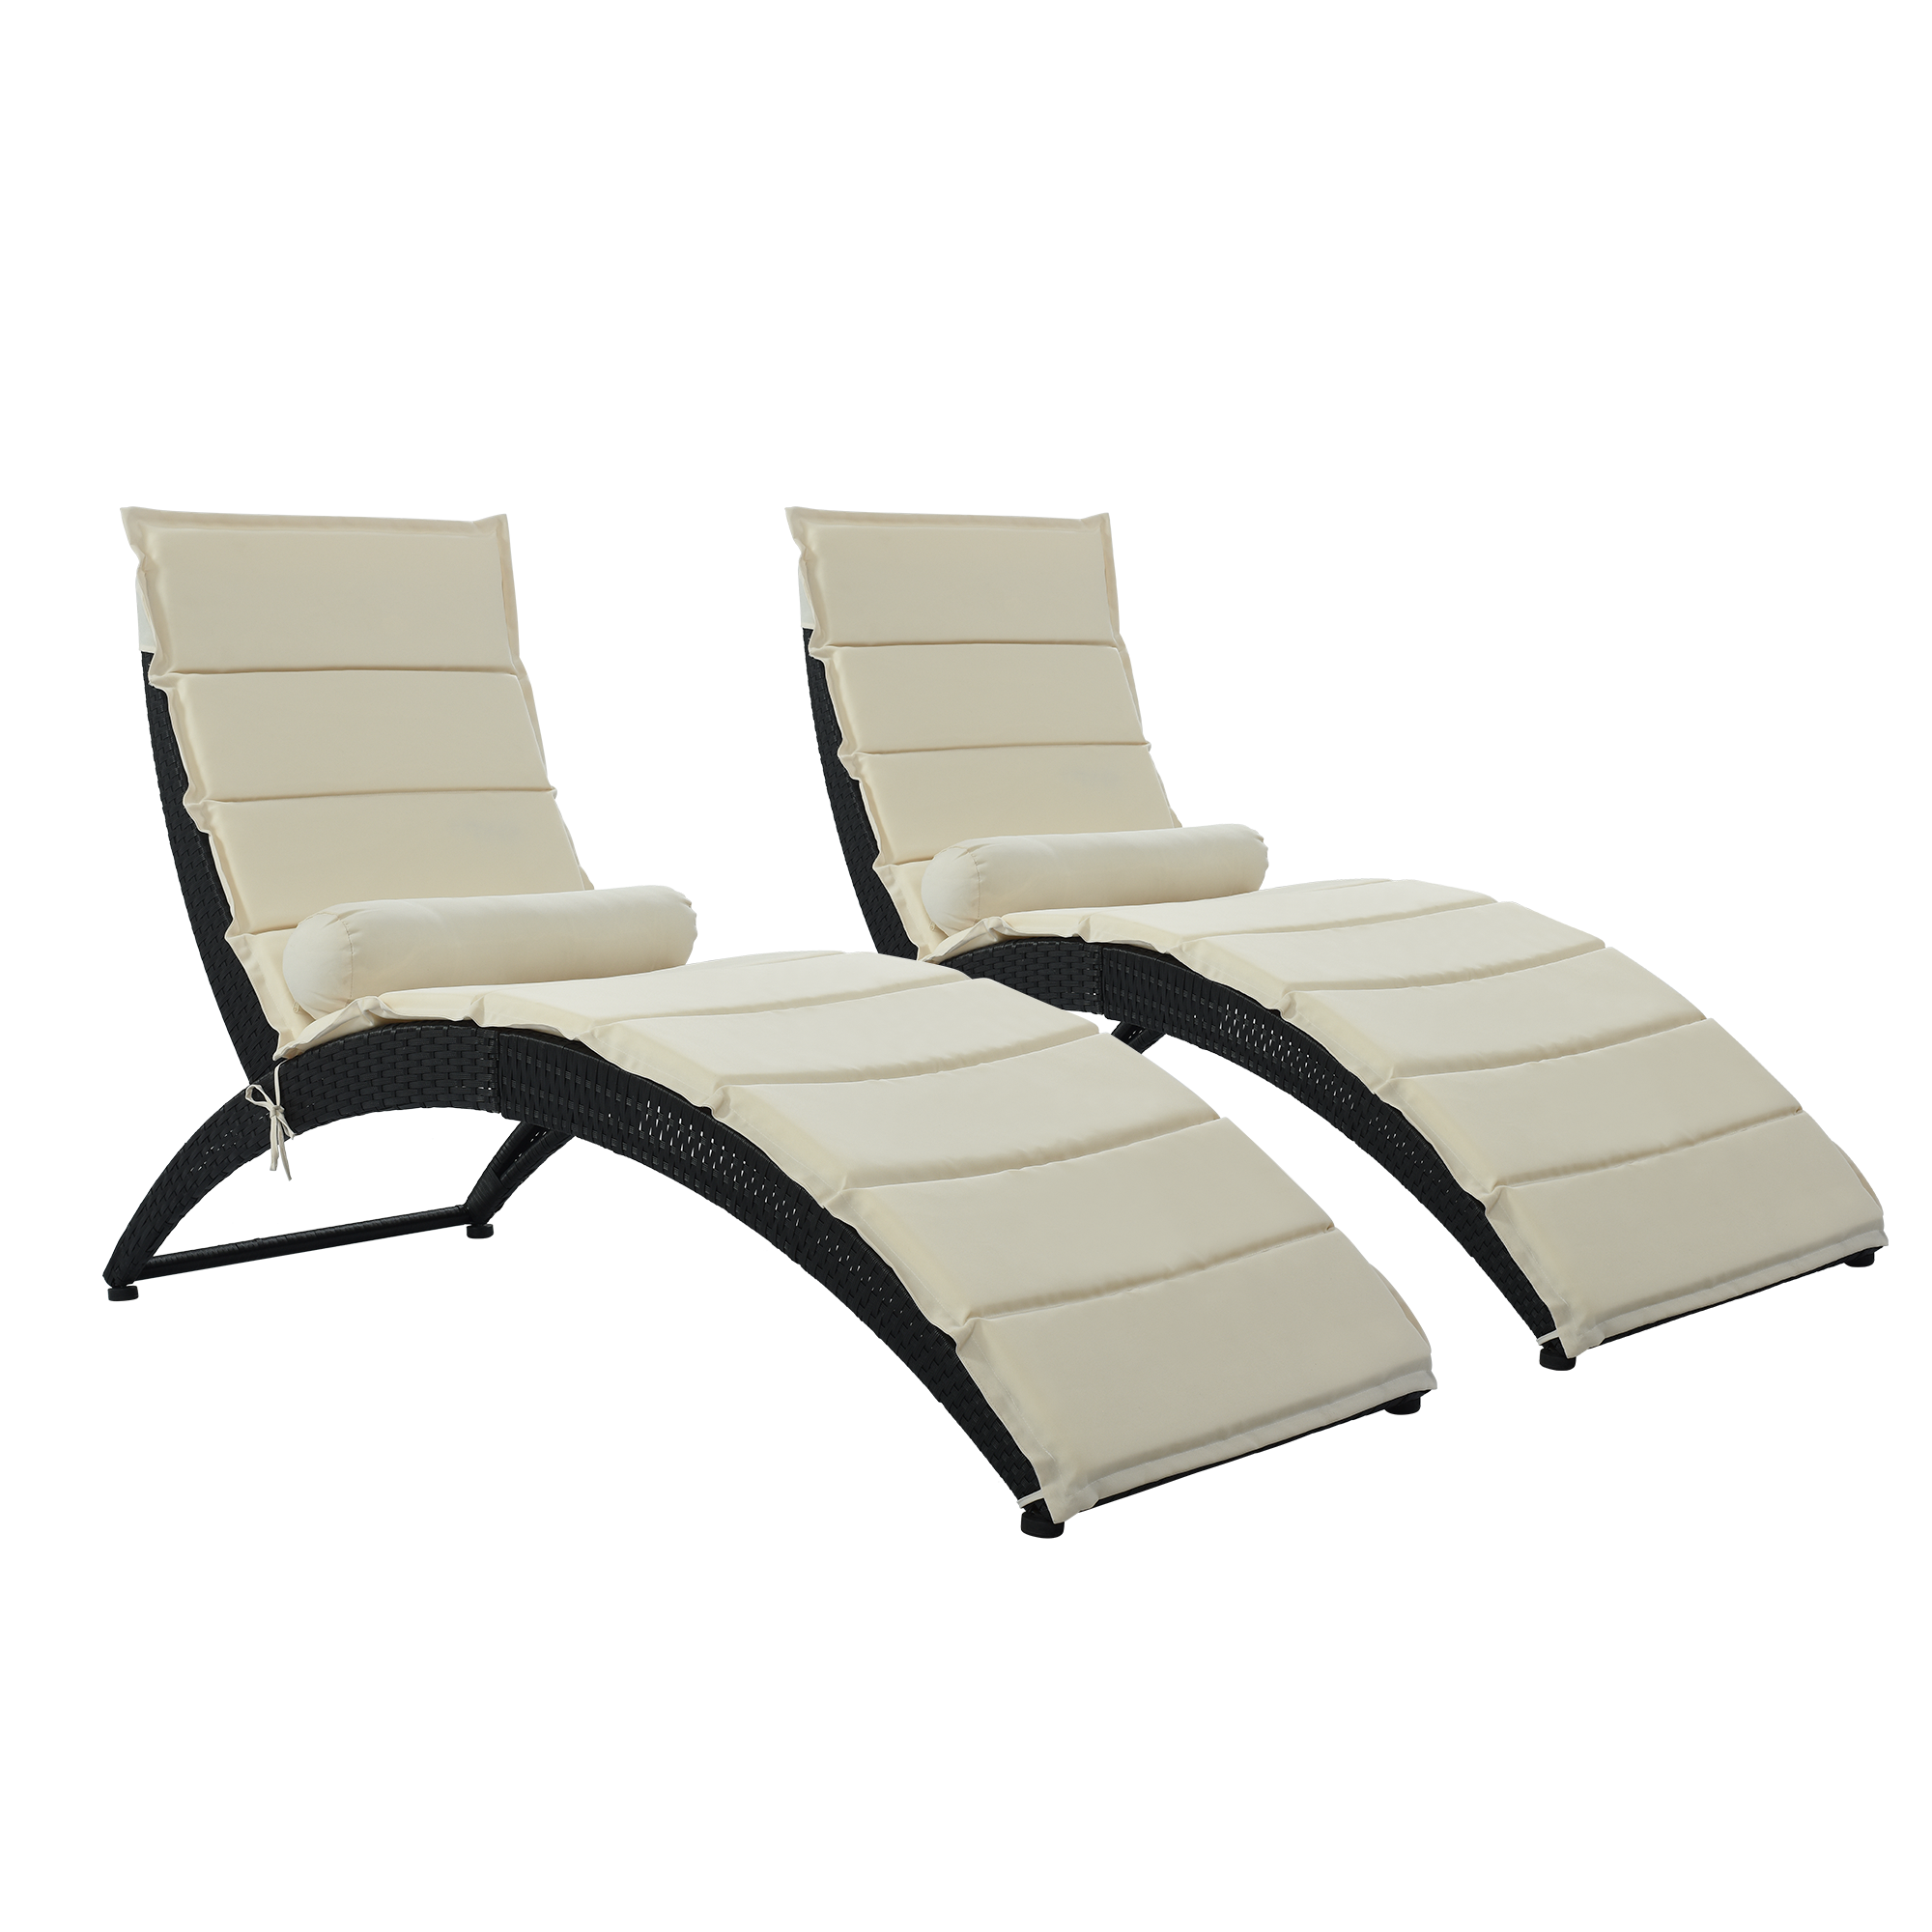 Sesslife 2-PCS Chaise Lounge Chairs for Outside, Patio Adjustable Lounge Chairs with Table Outdoor Rattan Wicker Pool Chaise Lounge Chairs Cushioned Poolside Folding Chaise Lounge Set - image 2 of 8